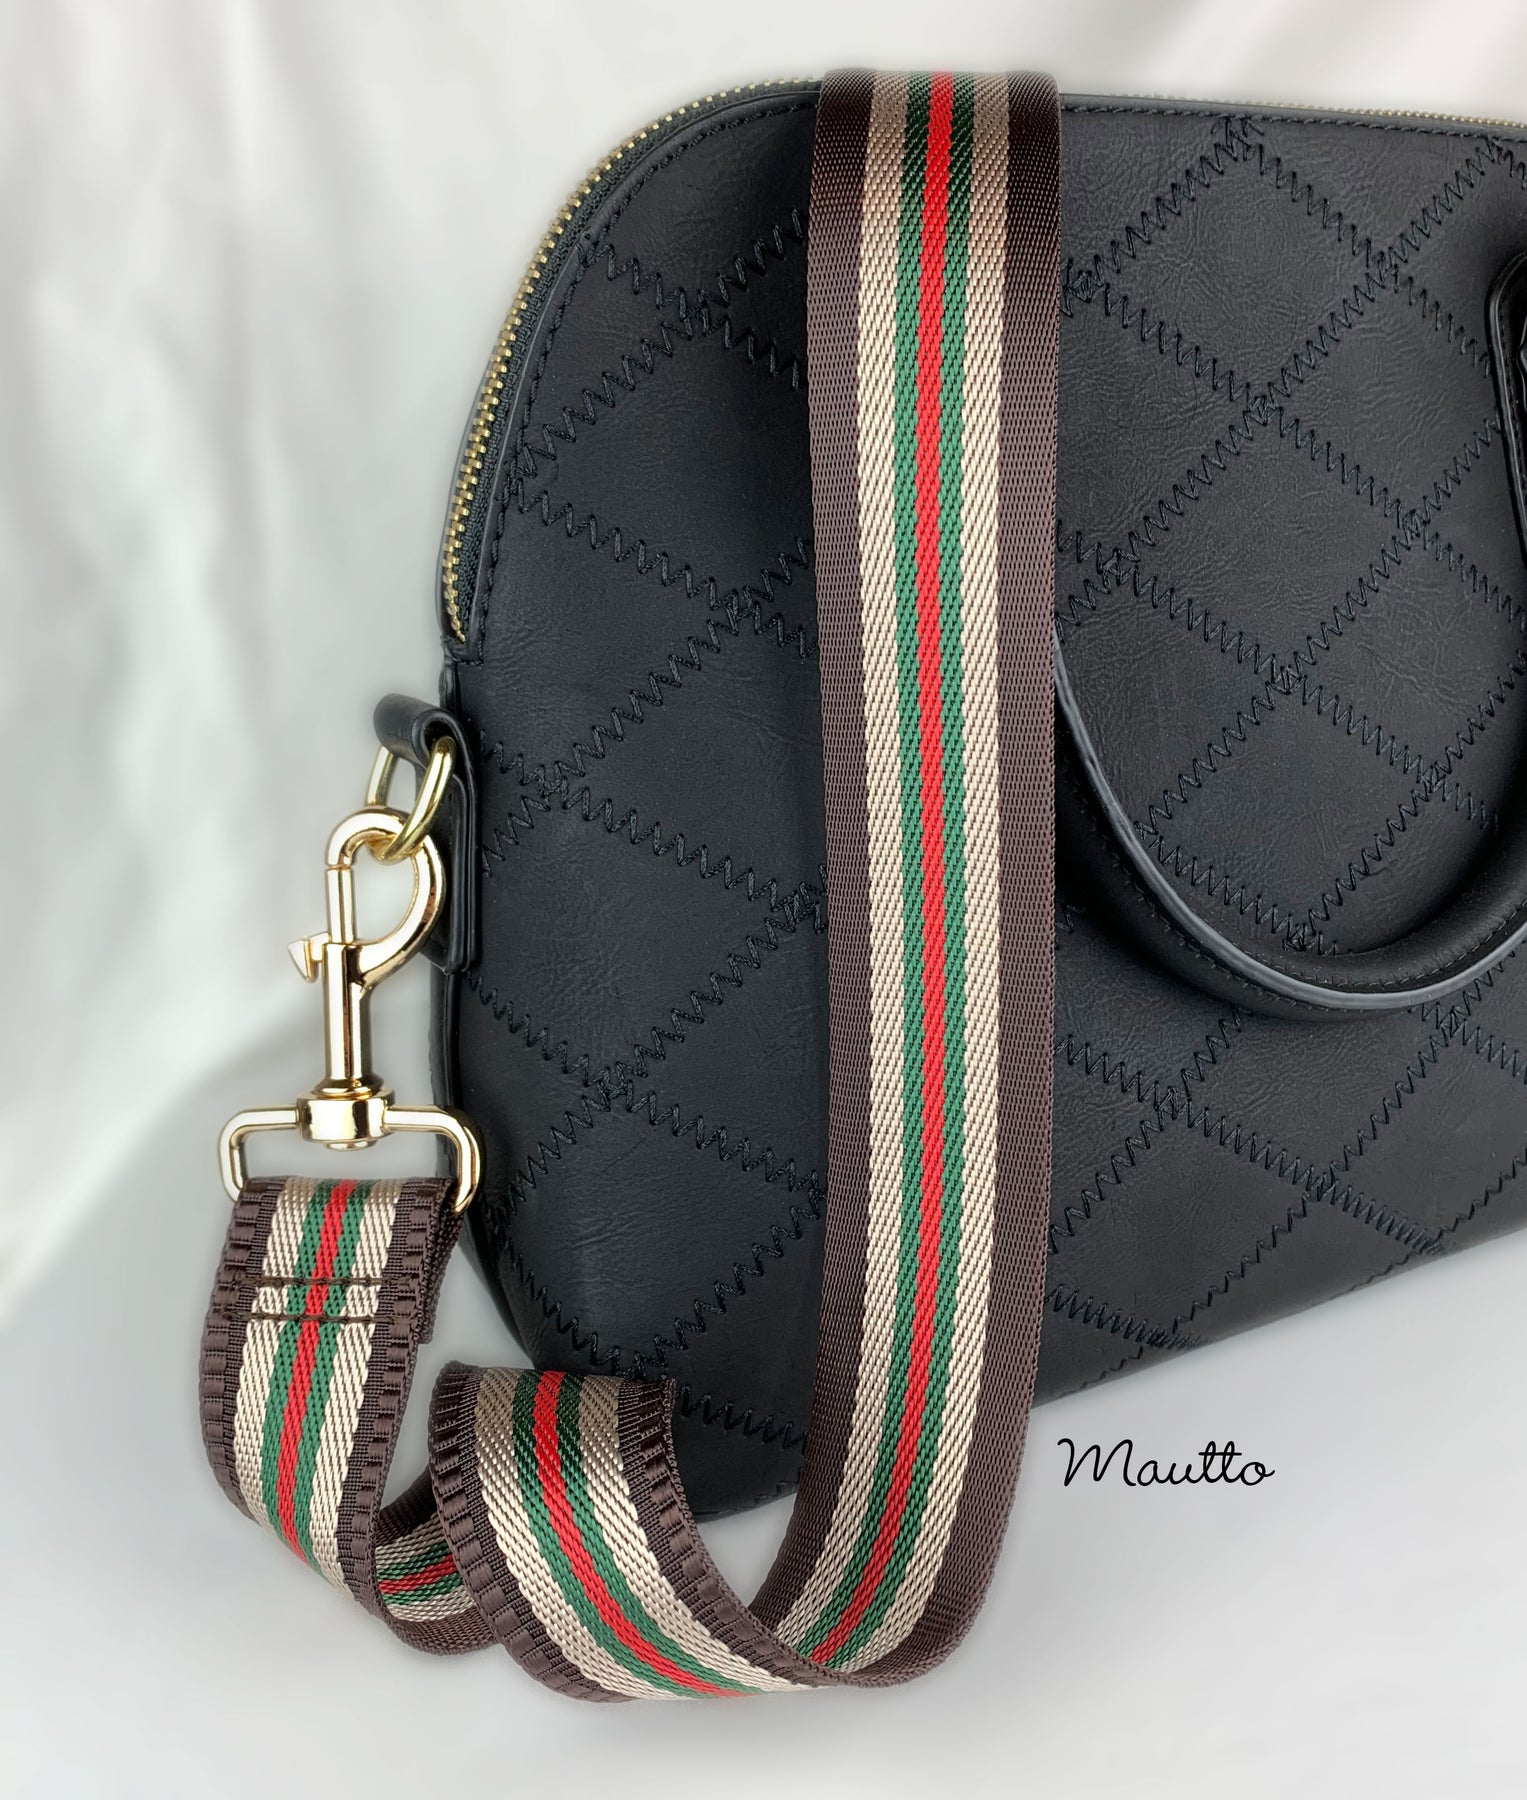 A How-to Guide for Choosing Your Cross Body Strap Length – Mautto